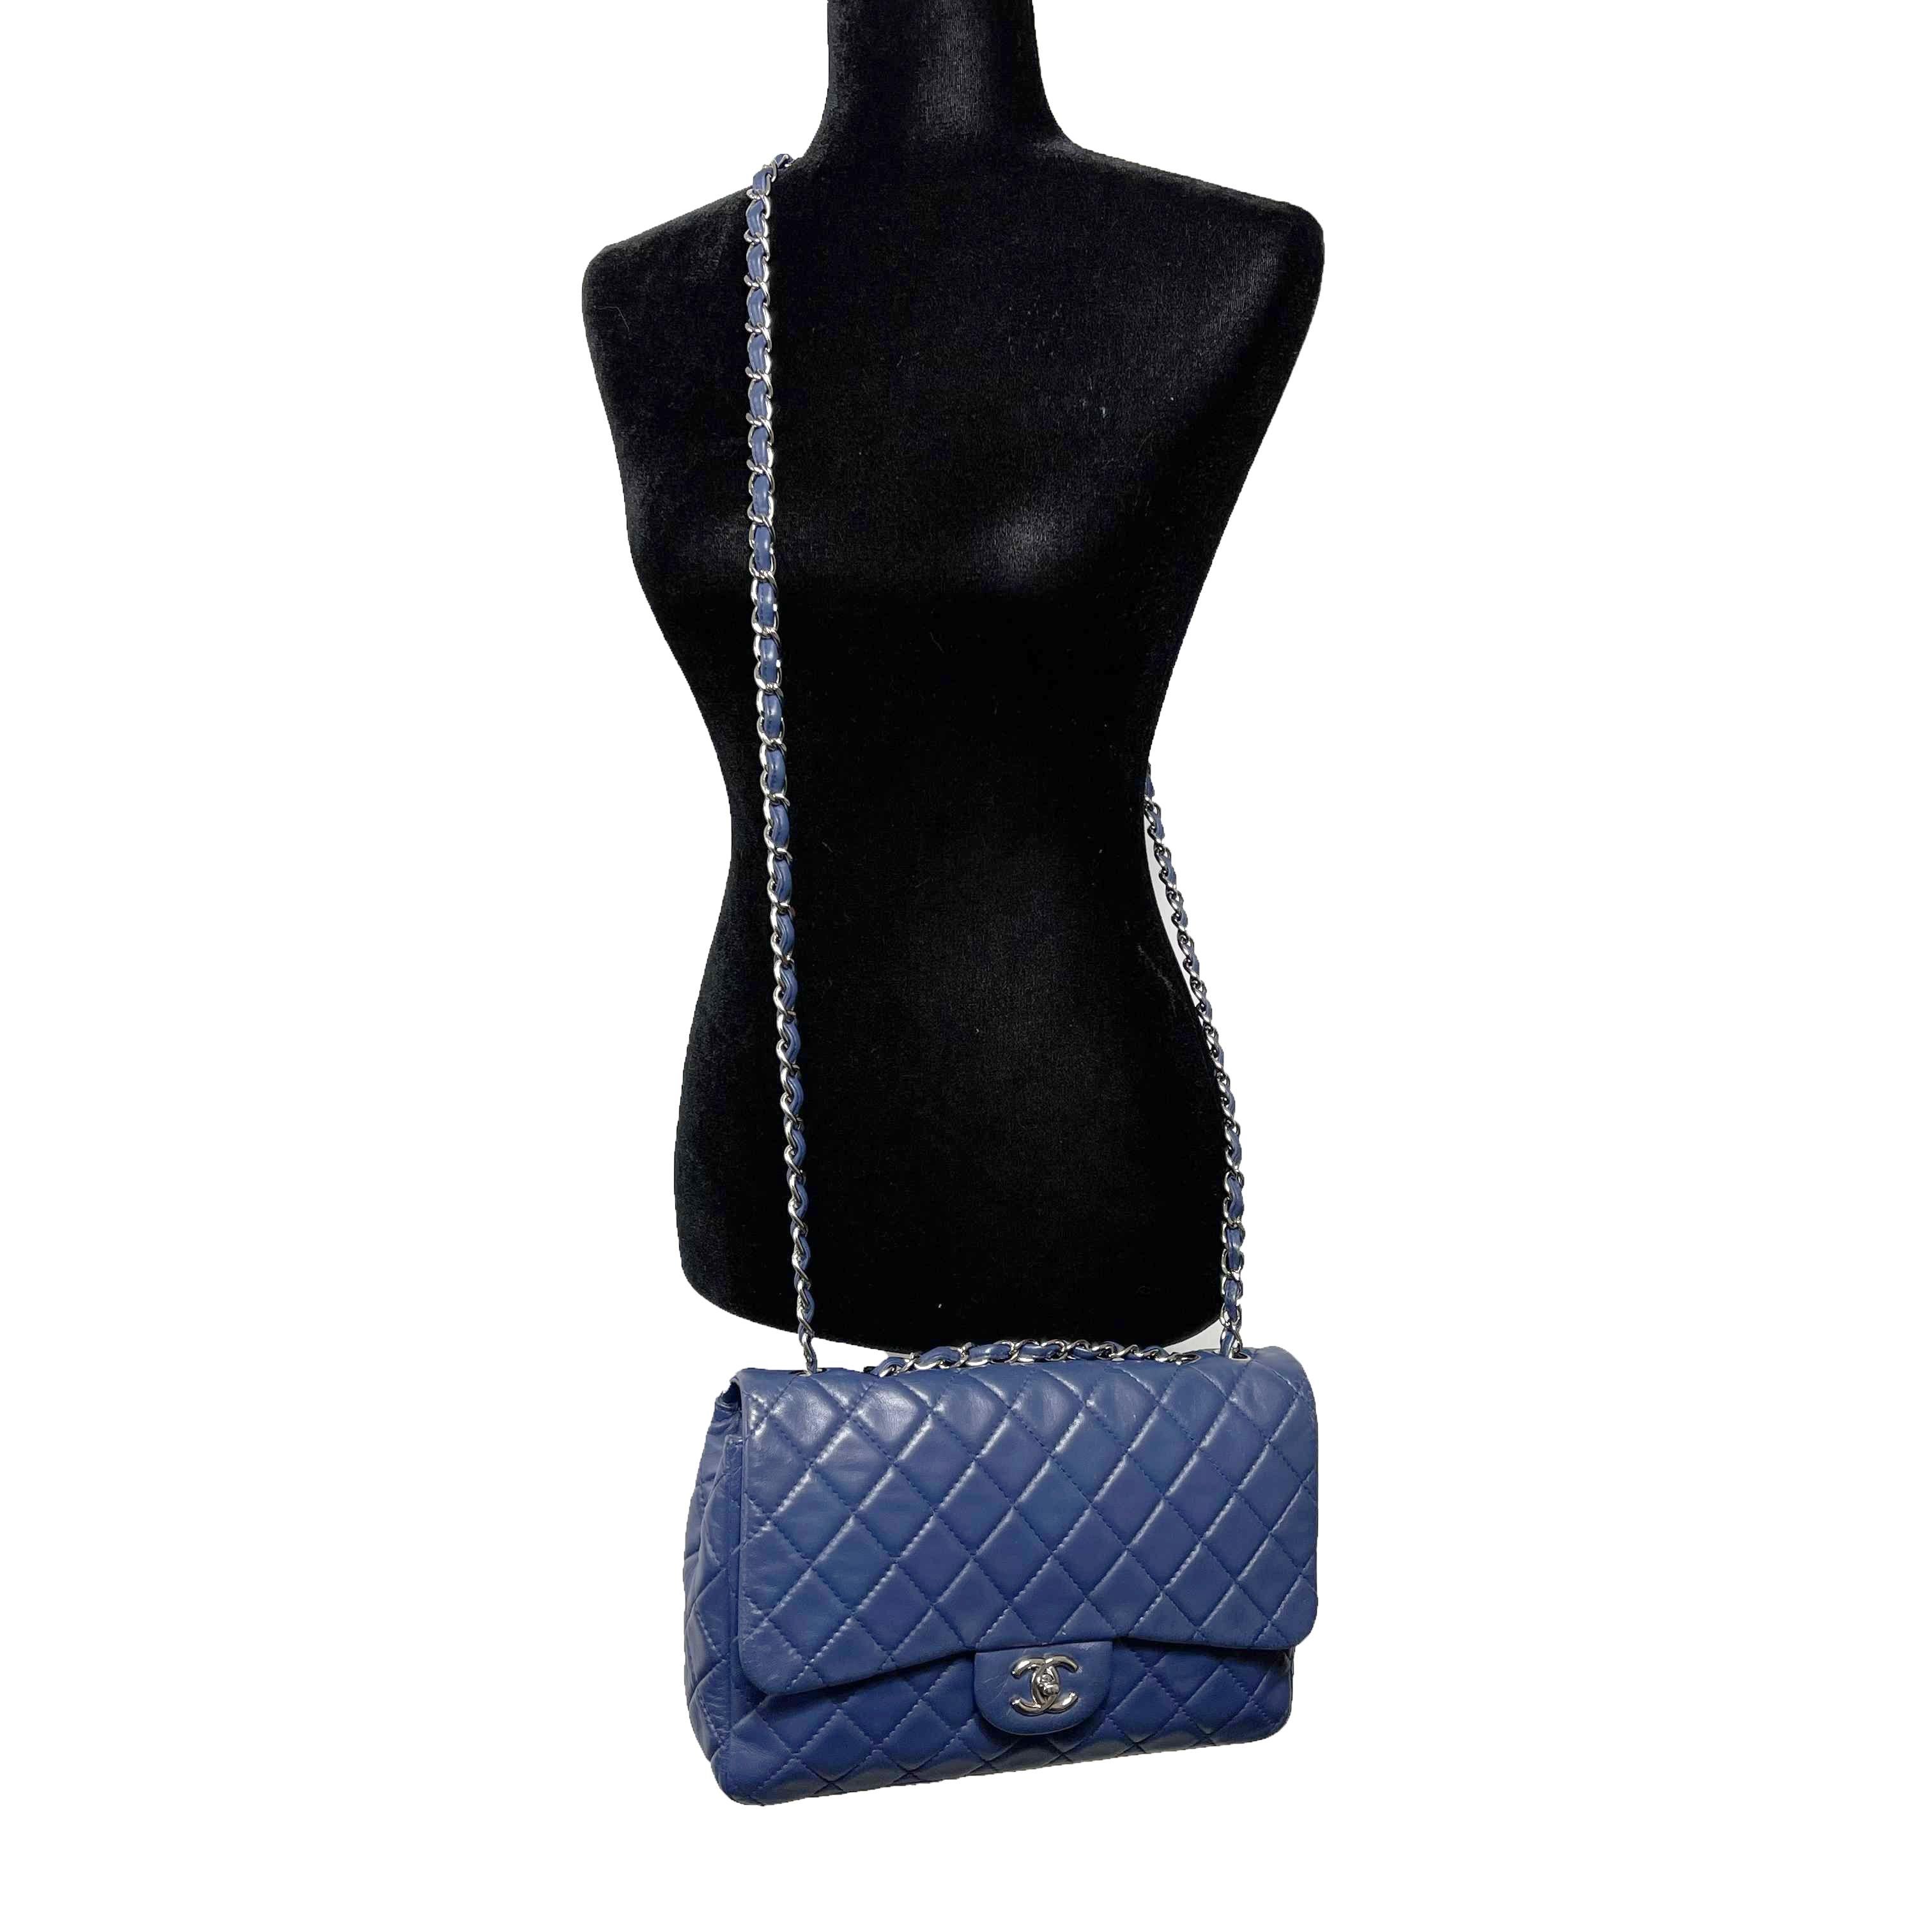 CHANEL Classic 08 Single Flap Bag Blue Quilted Lambskin Maxi Shoulder Bag For Sale 1